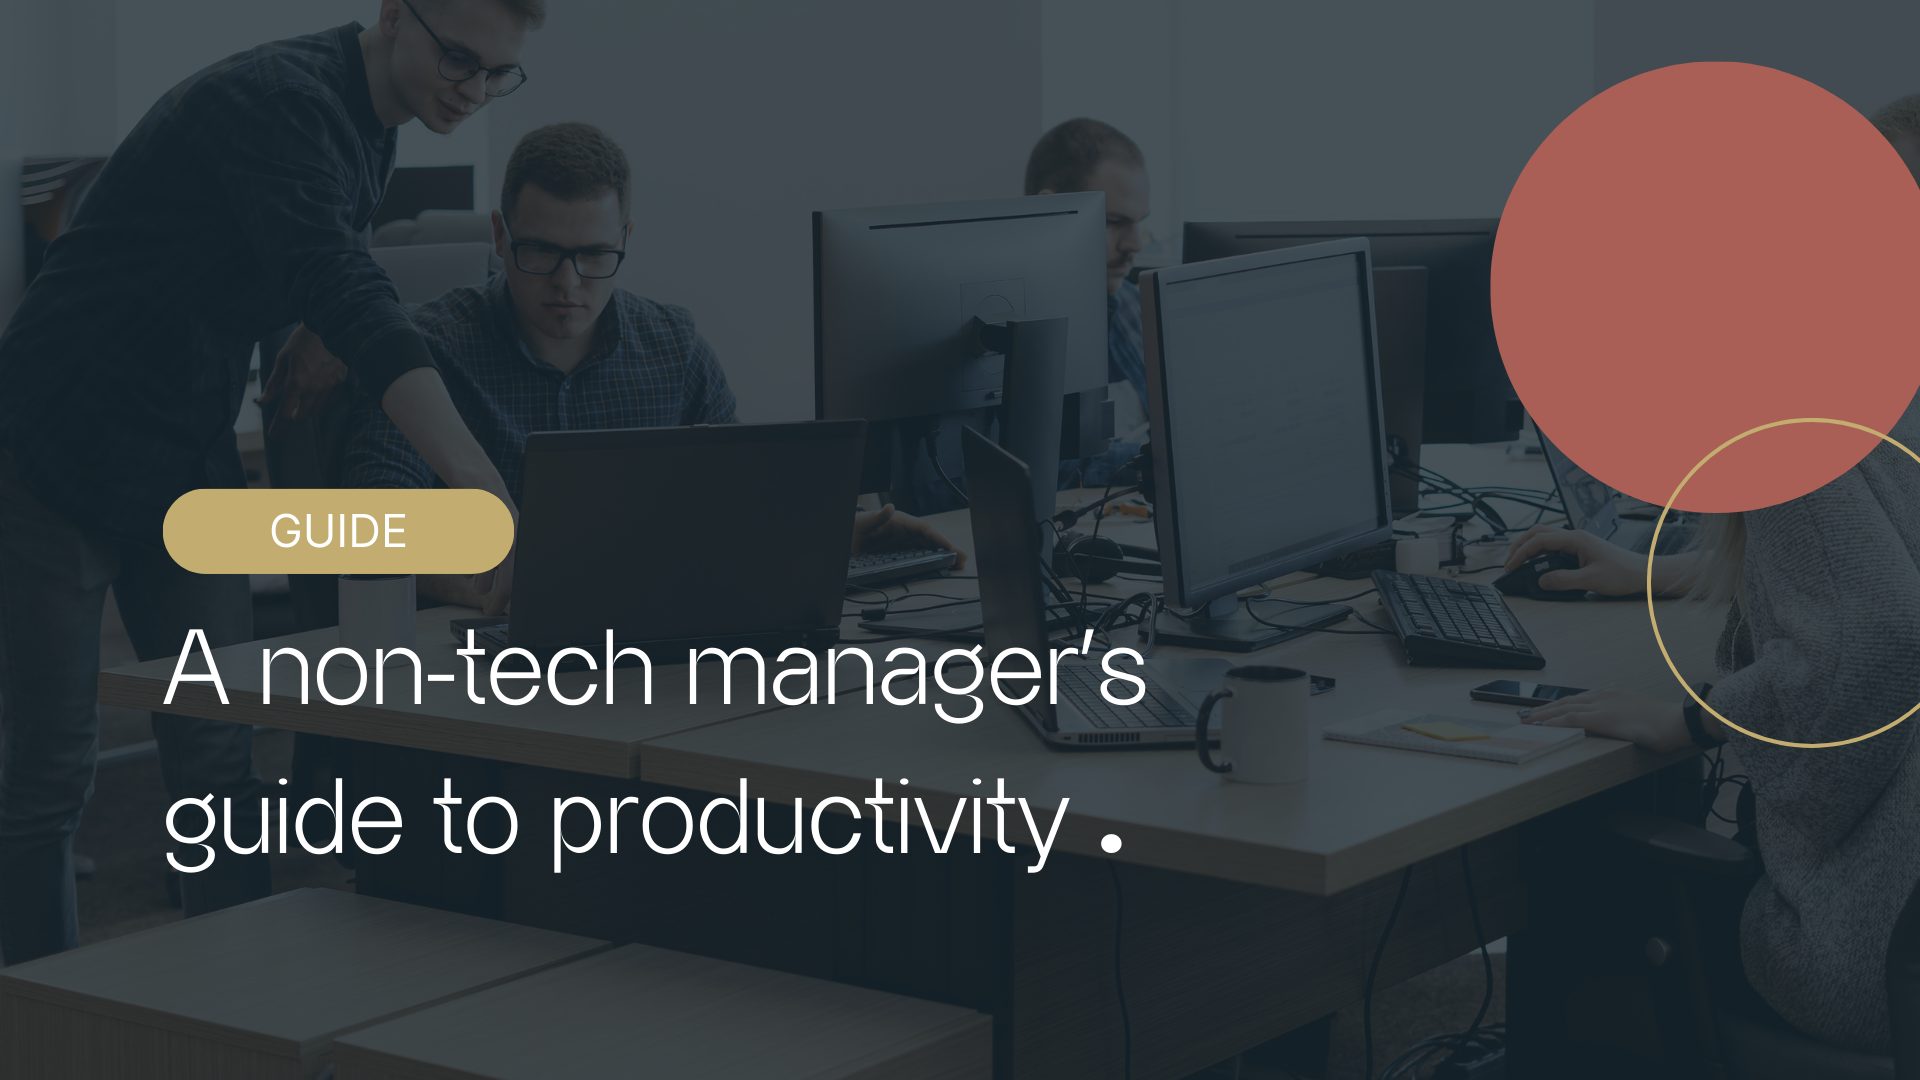 Unlock productivity - a non-tech manager's guide to Microsoft Suite